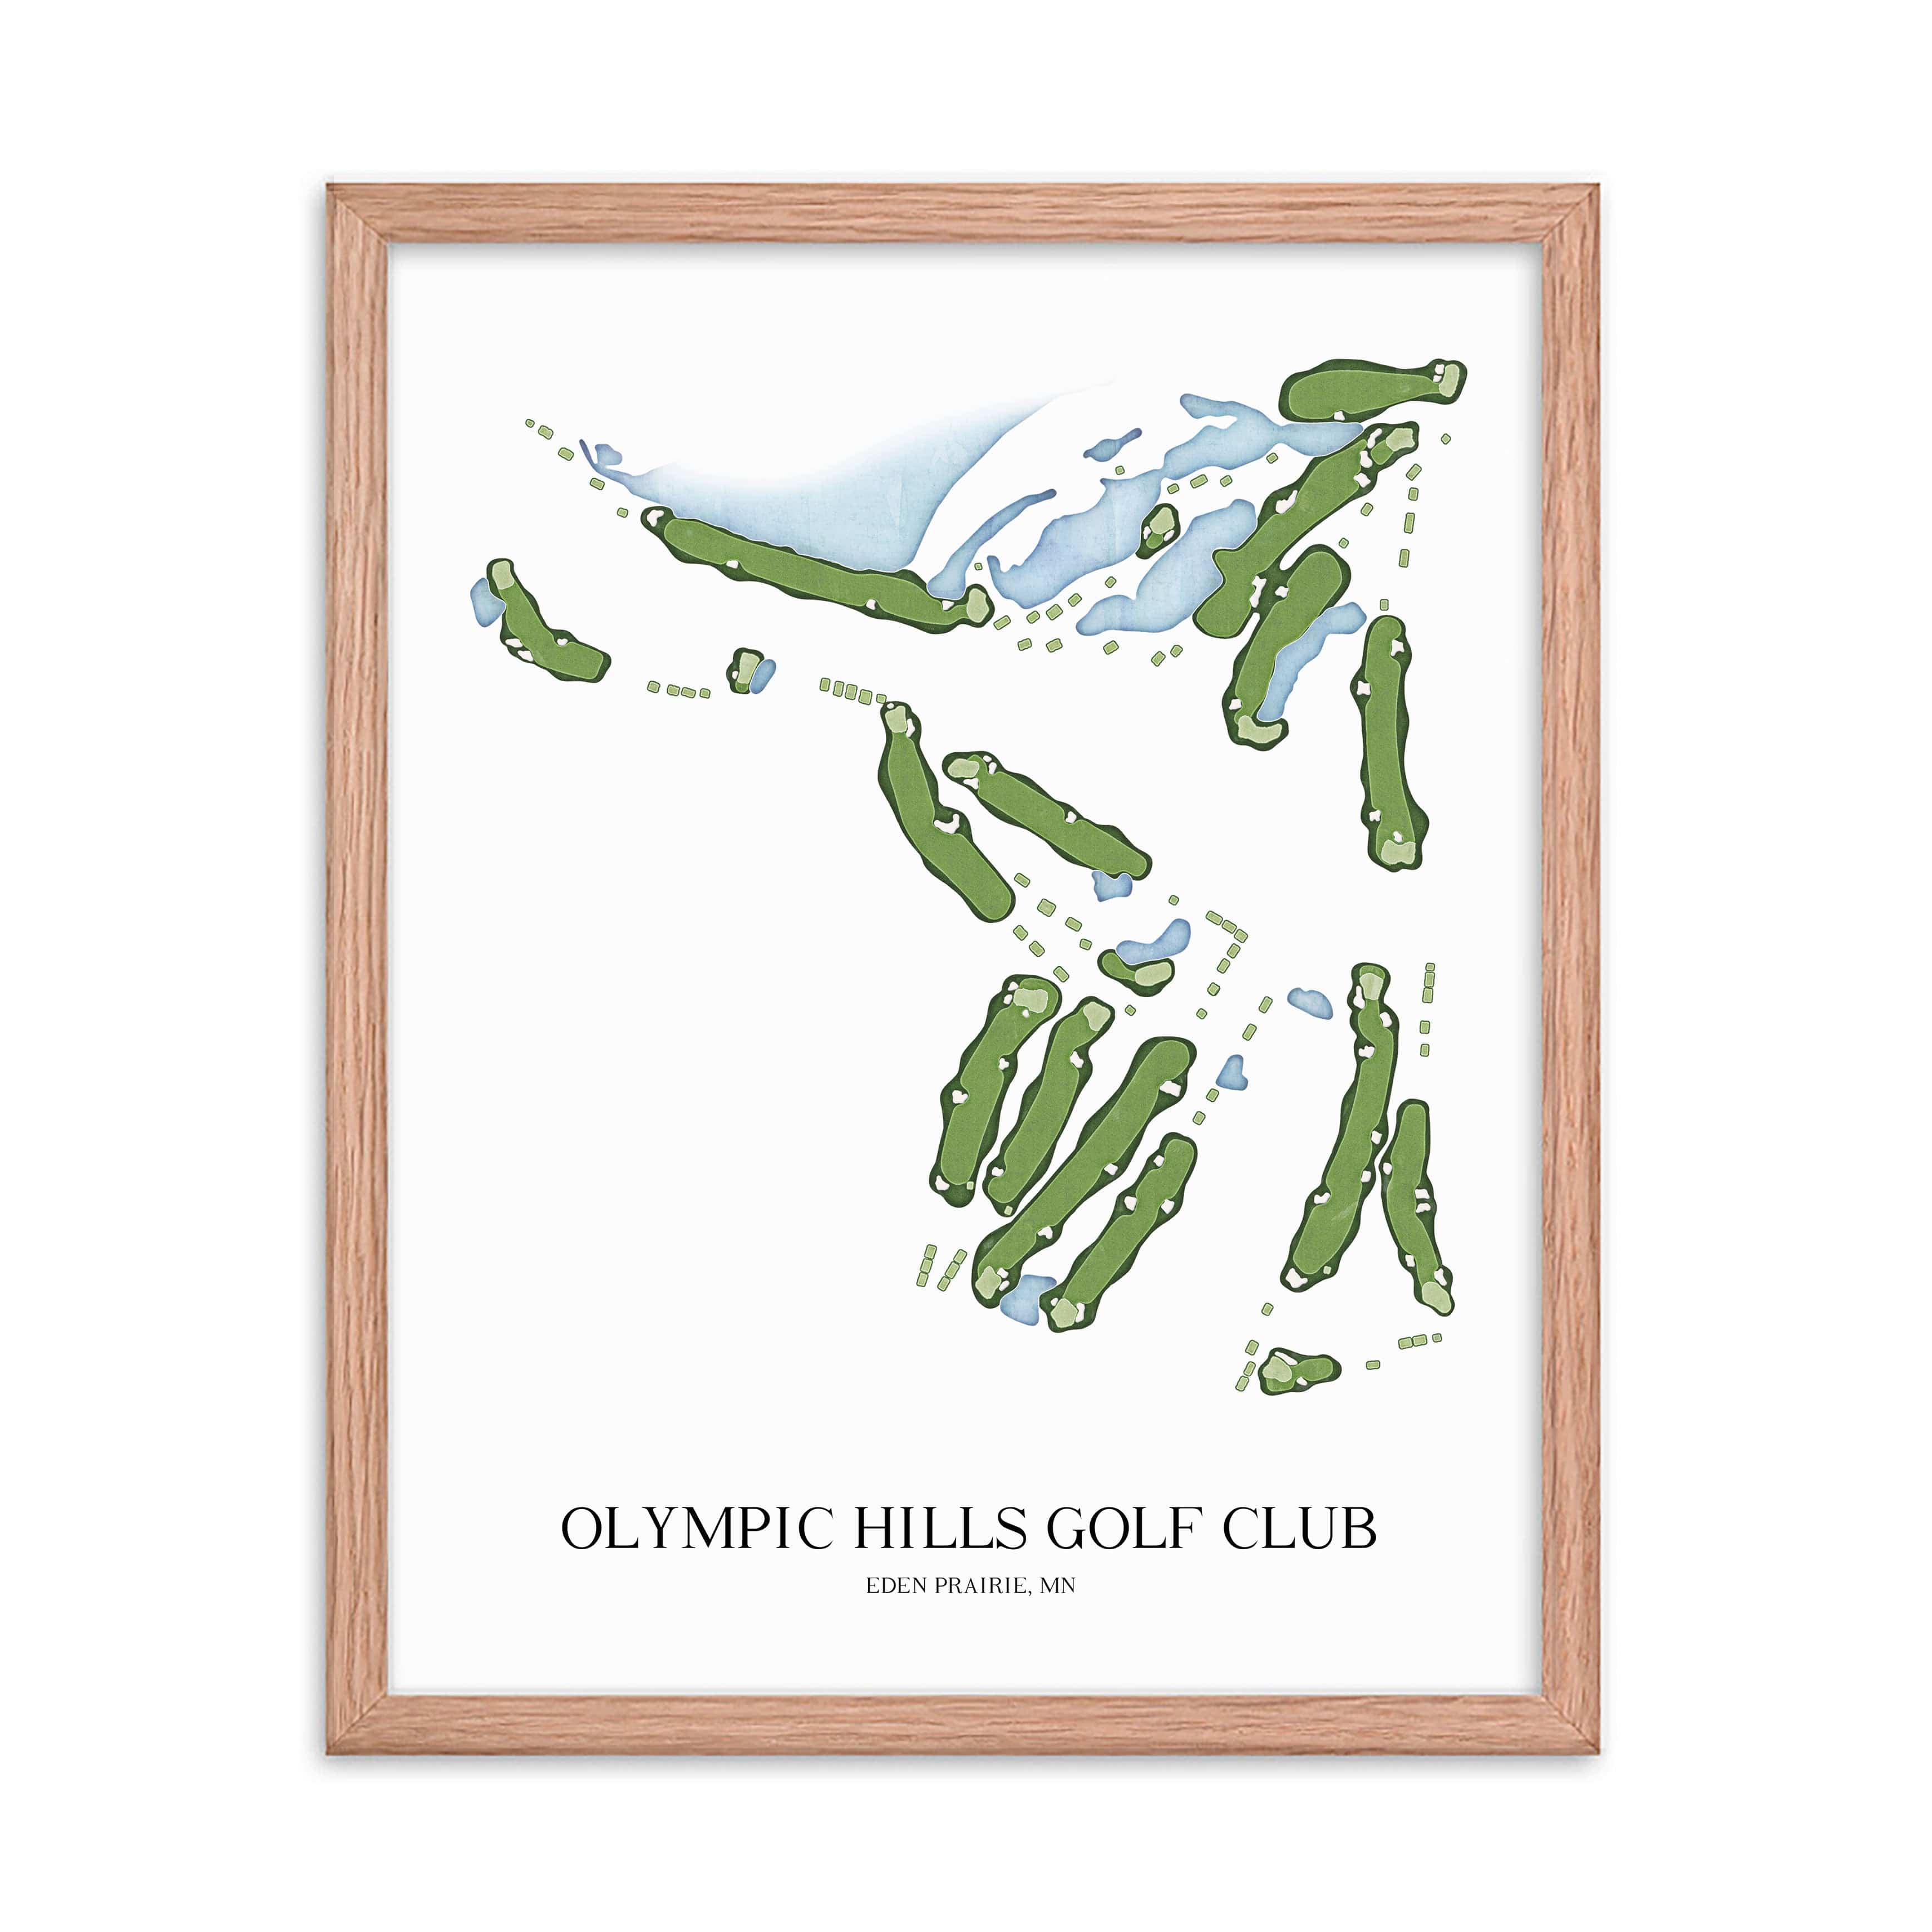 The 19th Hole Golf Shop - Golf Course Prints -  Olympic Hills Golf Course Map